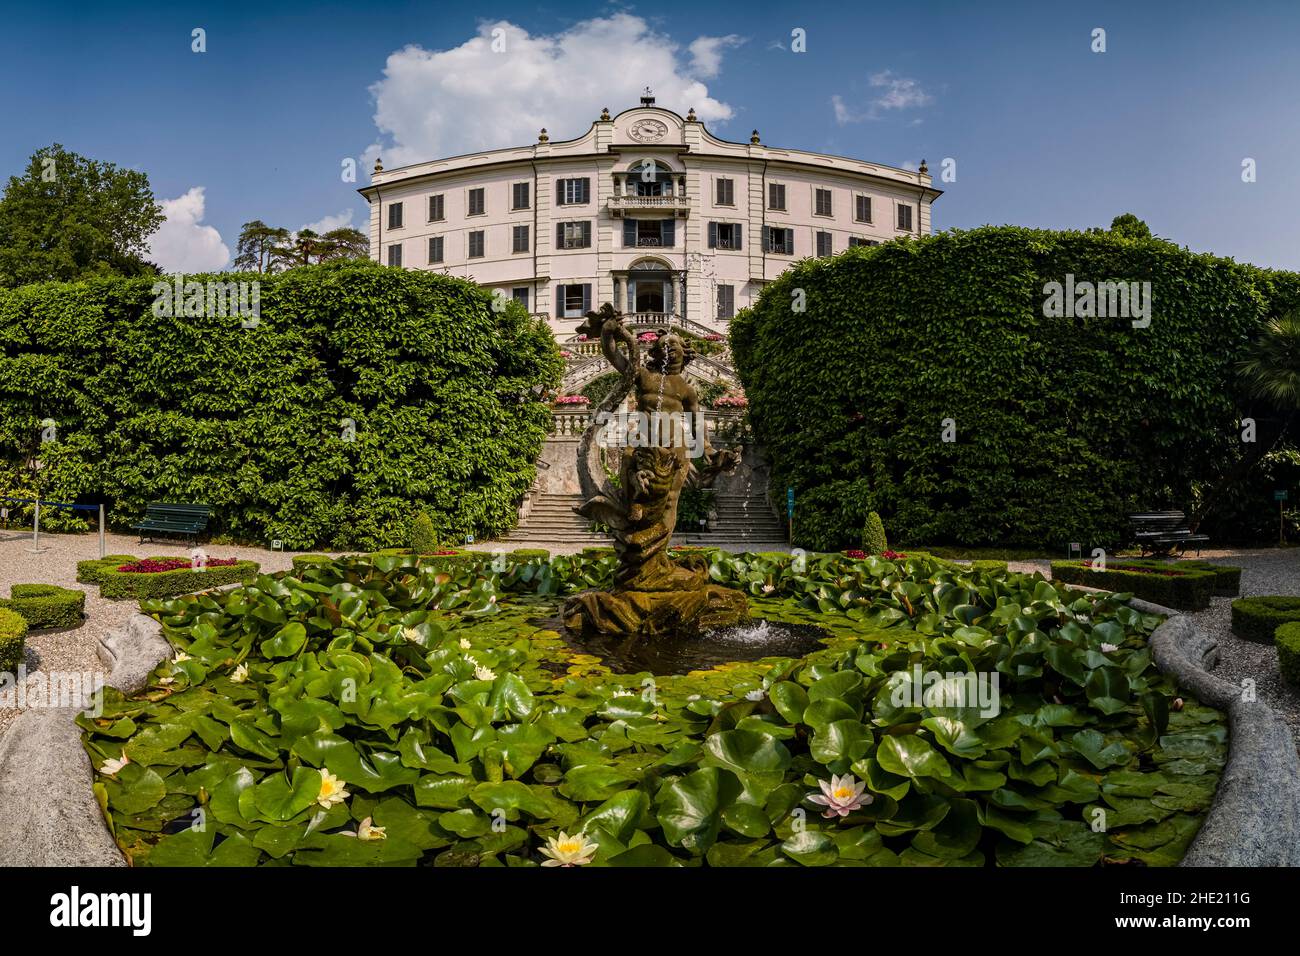 Panoramic view of Villa Carlotta, located at the lakeside of Lake Como, built in 18th century. Stock Photo